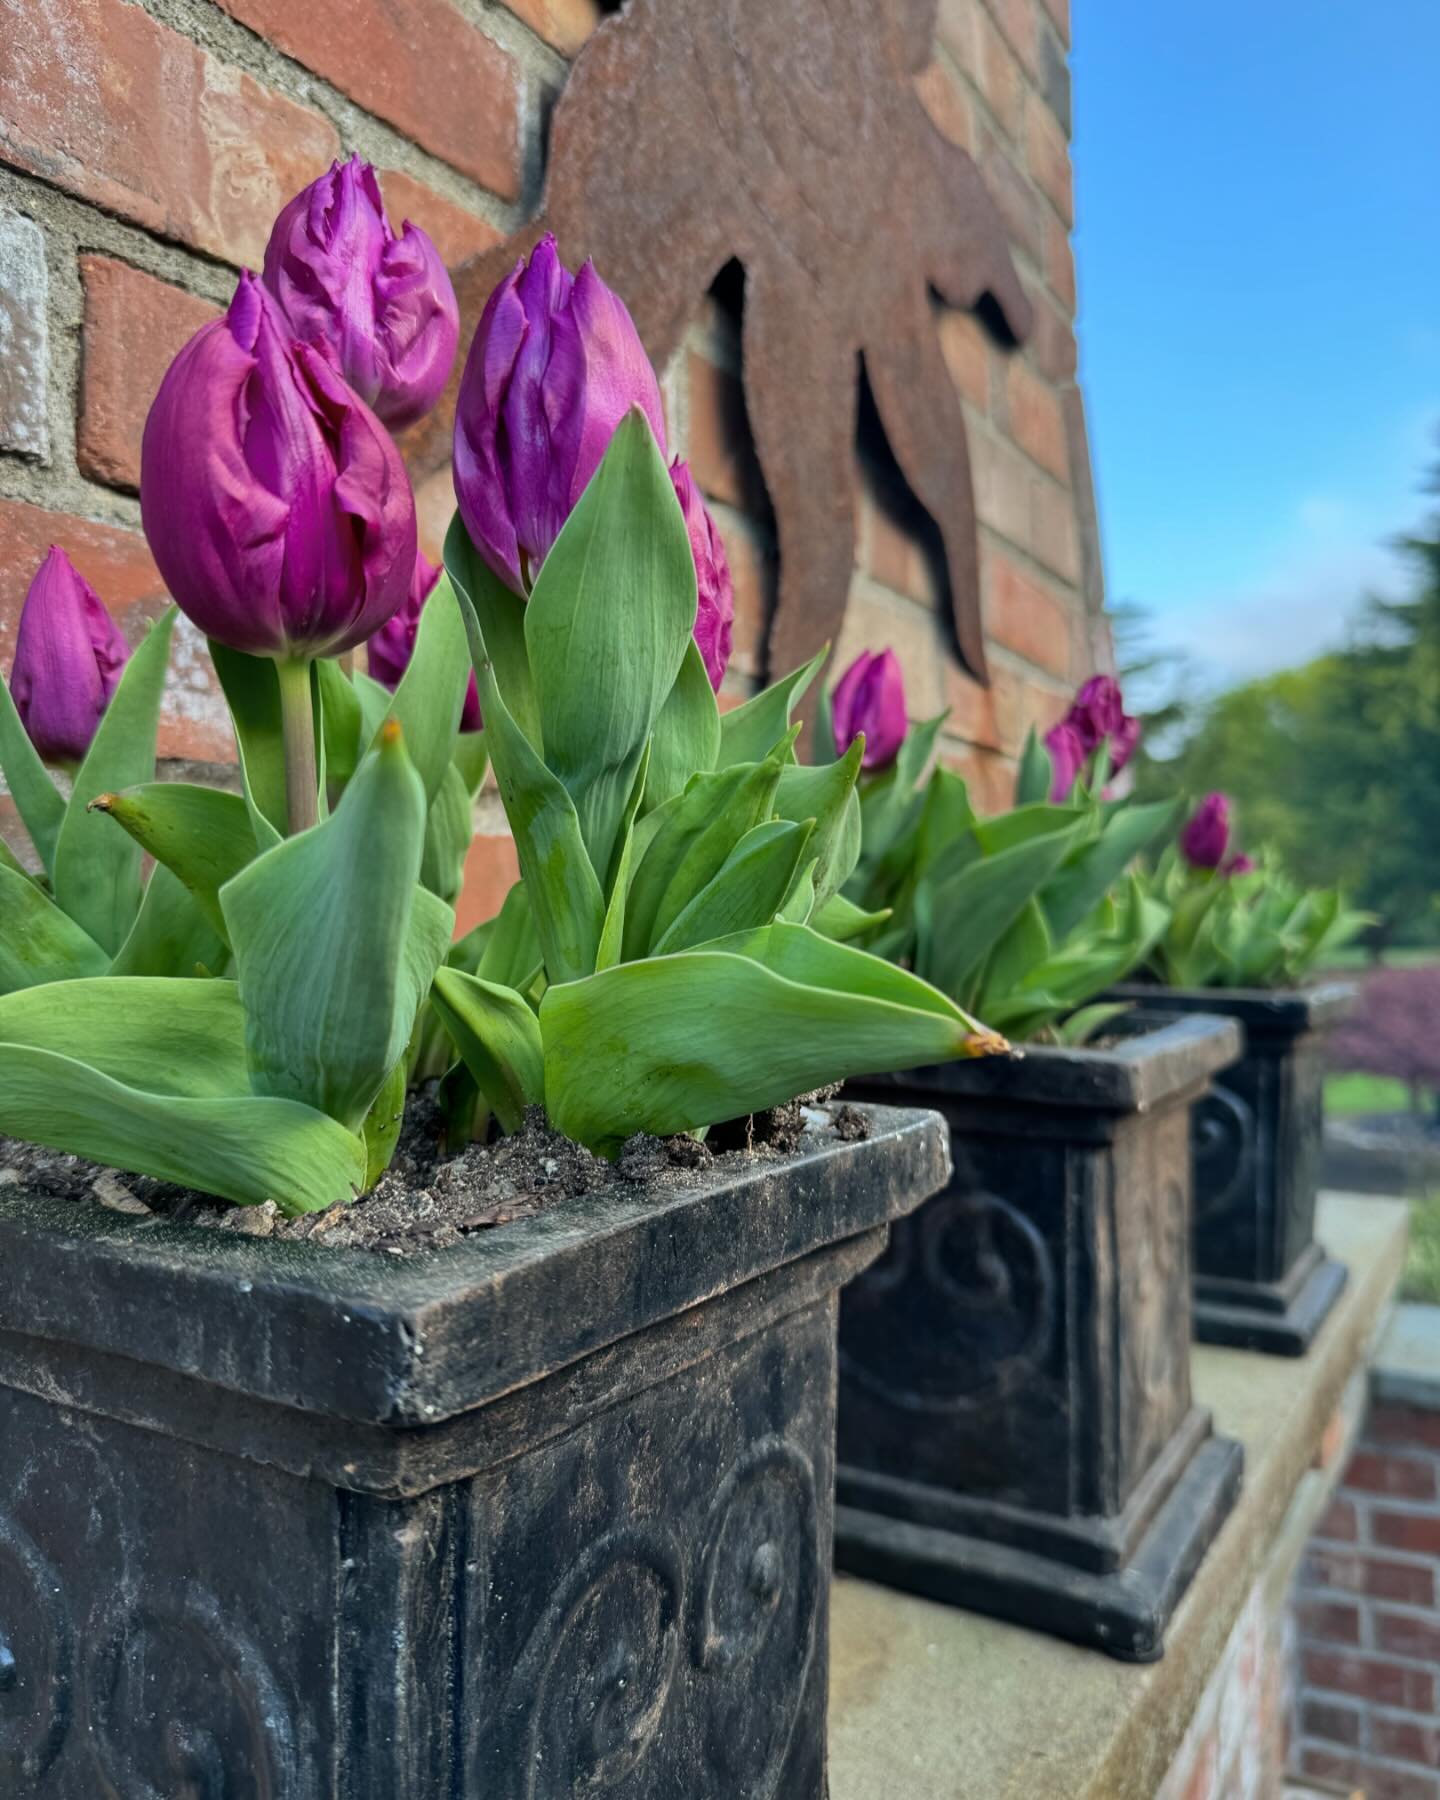 Thrifted patio pots planted with tulips that are now blooming!